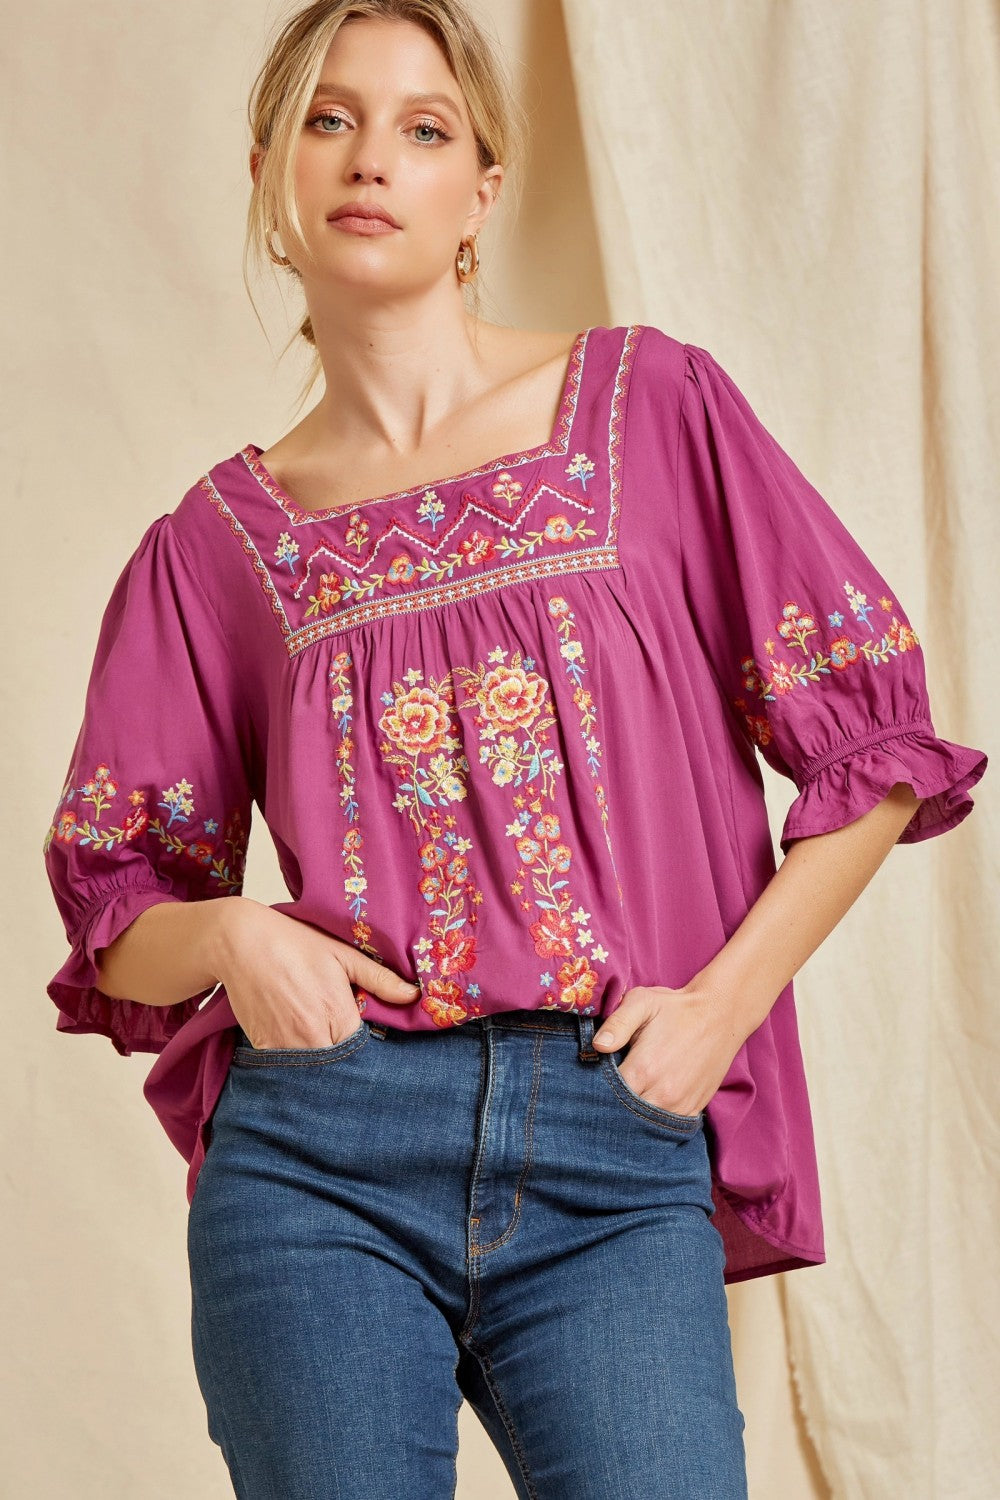 savanna jane / ANDREE BY UNIT Floral Embroidered Peasant Top – Violet Skye  Boutique